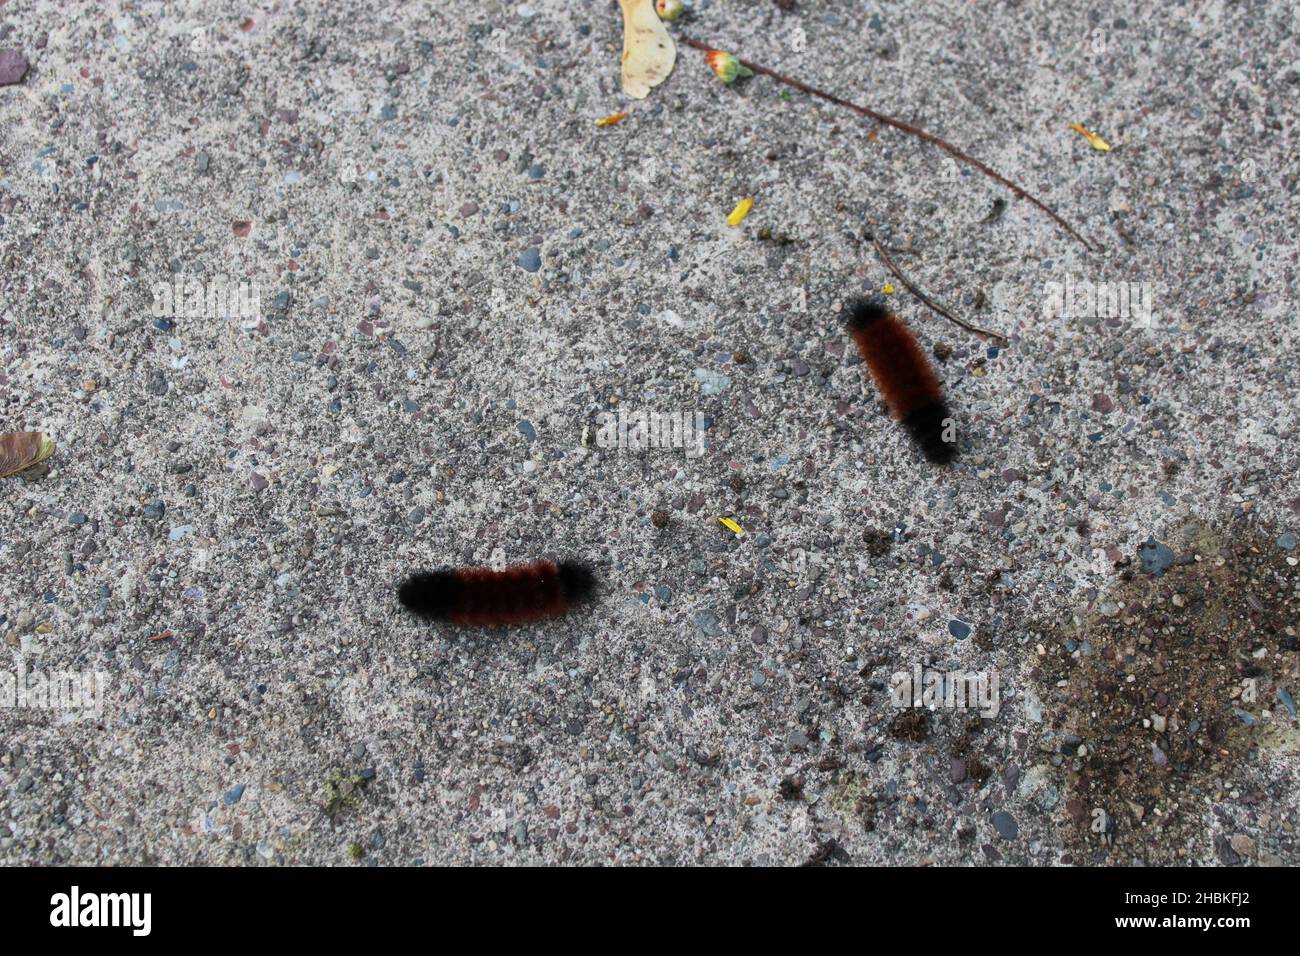 Two Isabella Tiger Both Caterpillars on Gray Concrete Stock Photo